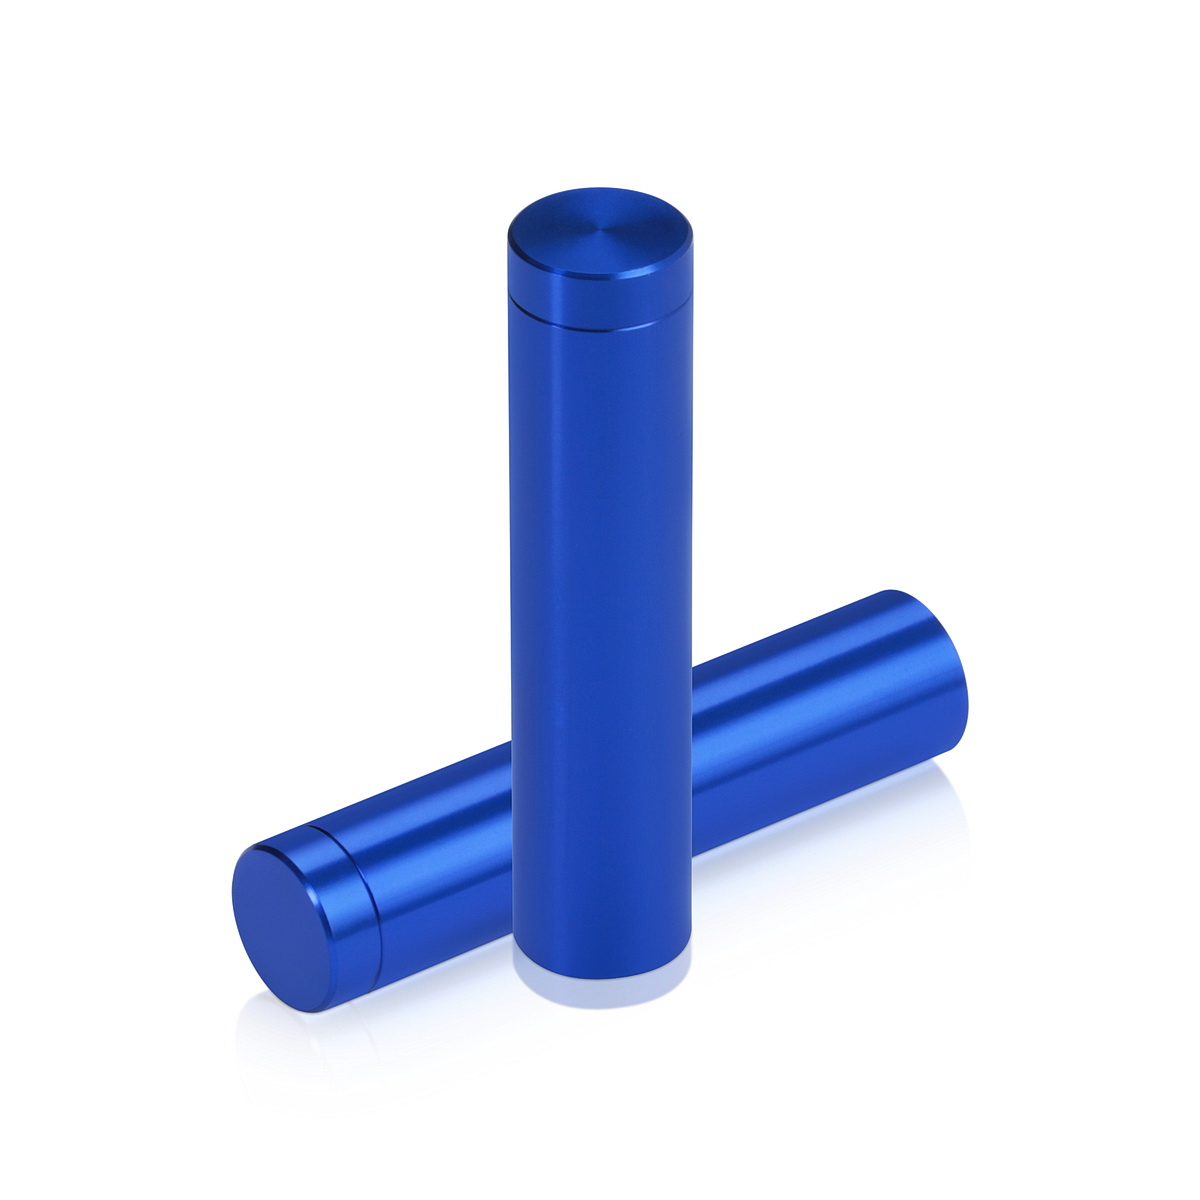 1/2'' Diameter X 2'' Barrel Length, Affordable Aluminum Standoffs, Blue Anodized Finish Easy Fasten Standoff (For Inside / Outside use) [Required Material Hole Size: 3/8'']